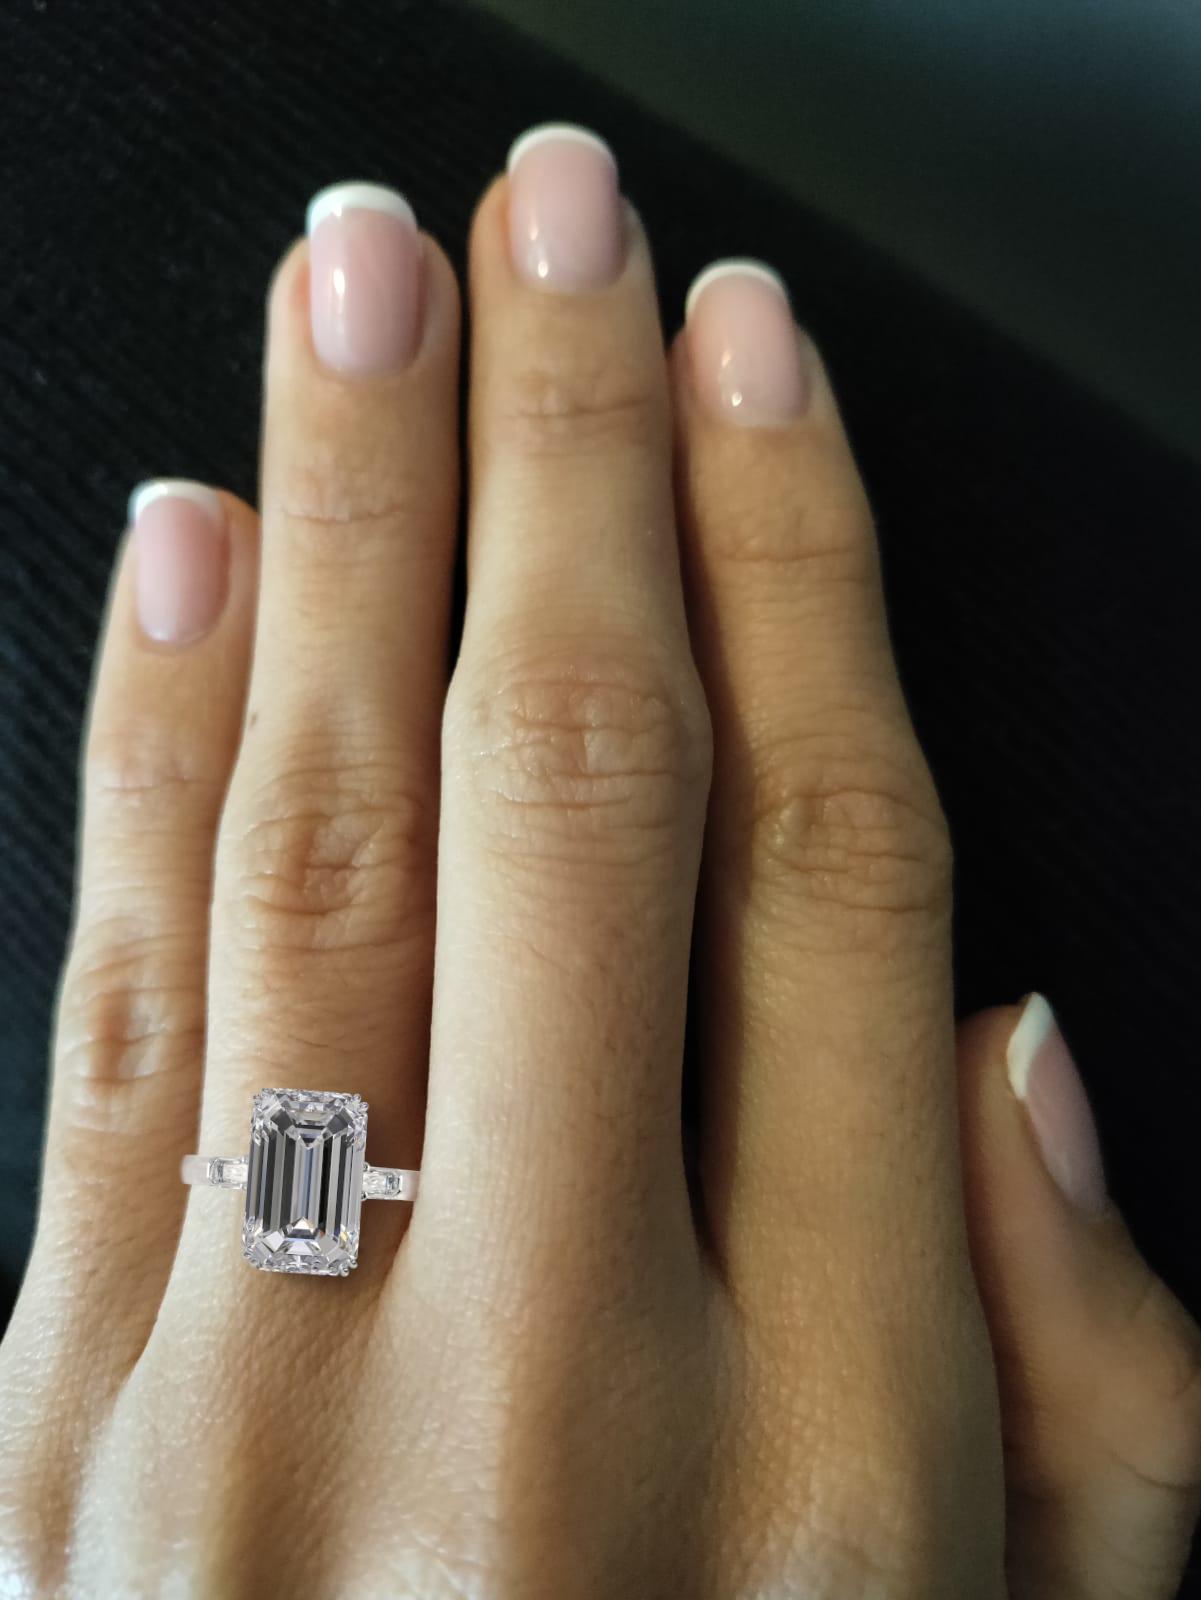 Exquisite Antinori Fine Jewels engagement ring crafted in platinum, featuring an exceptional GIA certified long emerald cut diamond weighing 3 carats, h color,  clarity. The ring vs2 as perfect excellent proportions.

This spectacular diamond floats